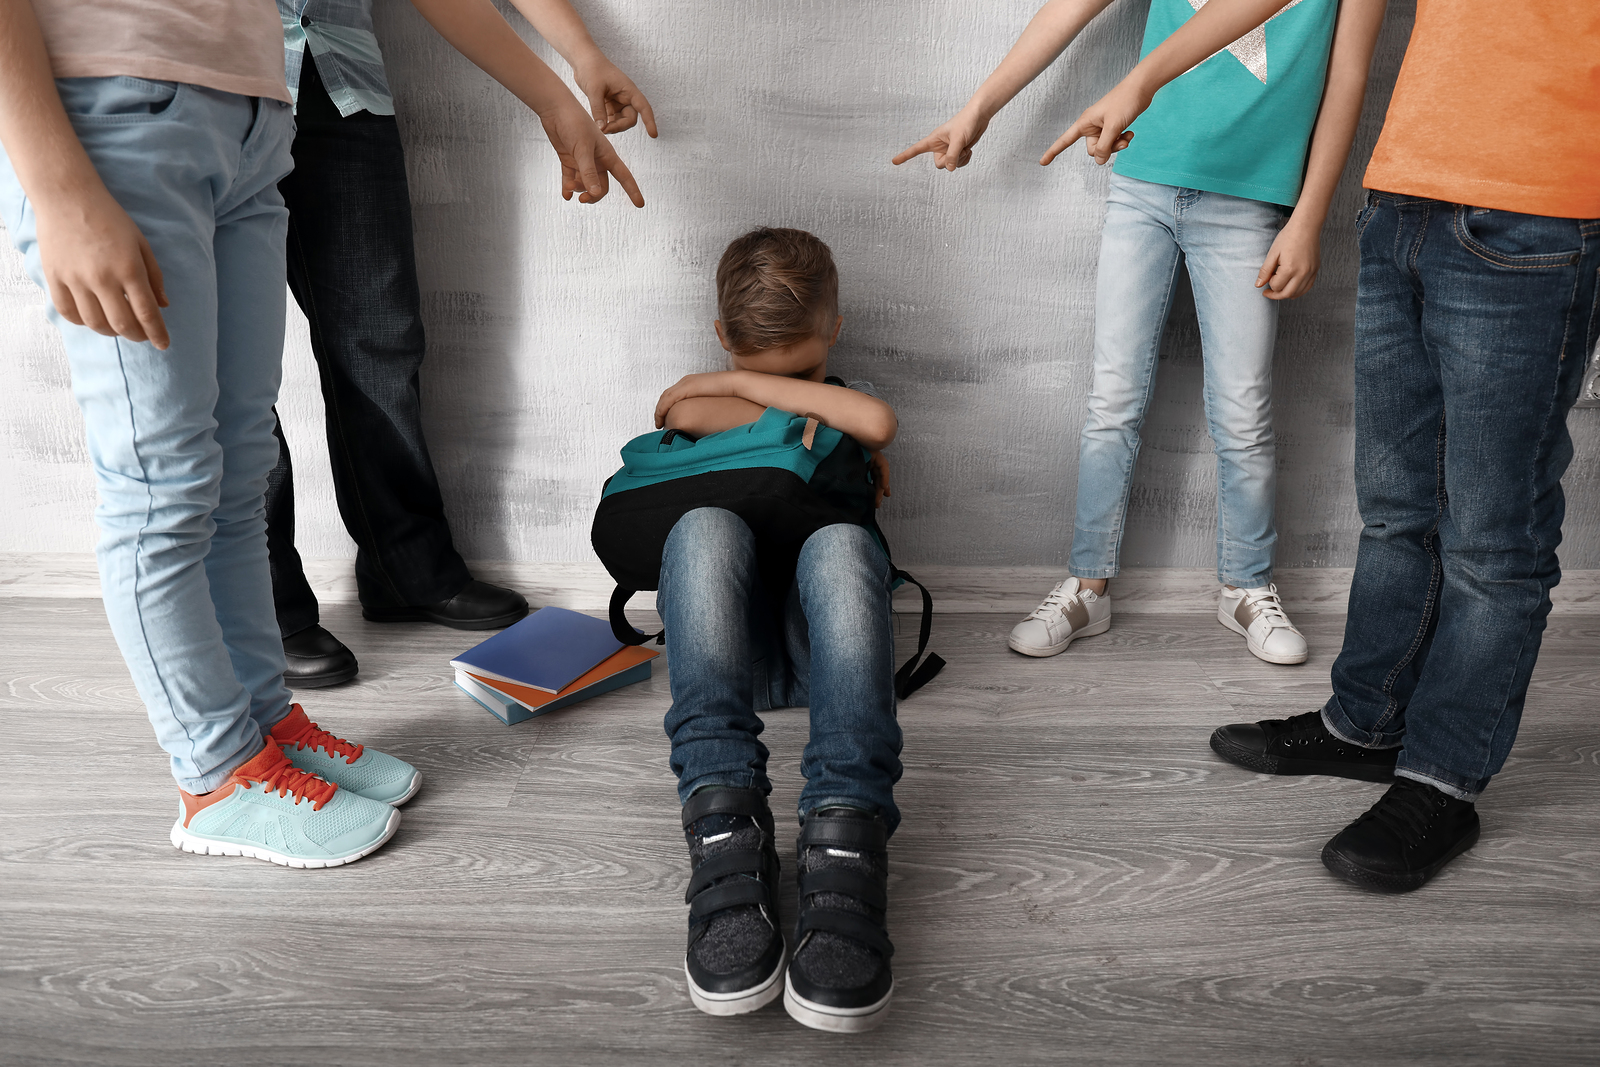 Physical Bullying In Schools